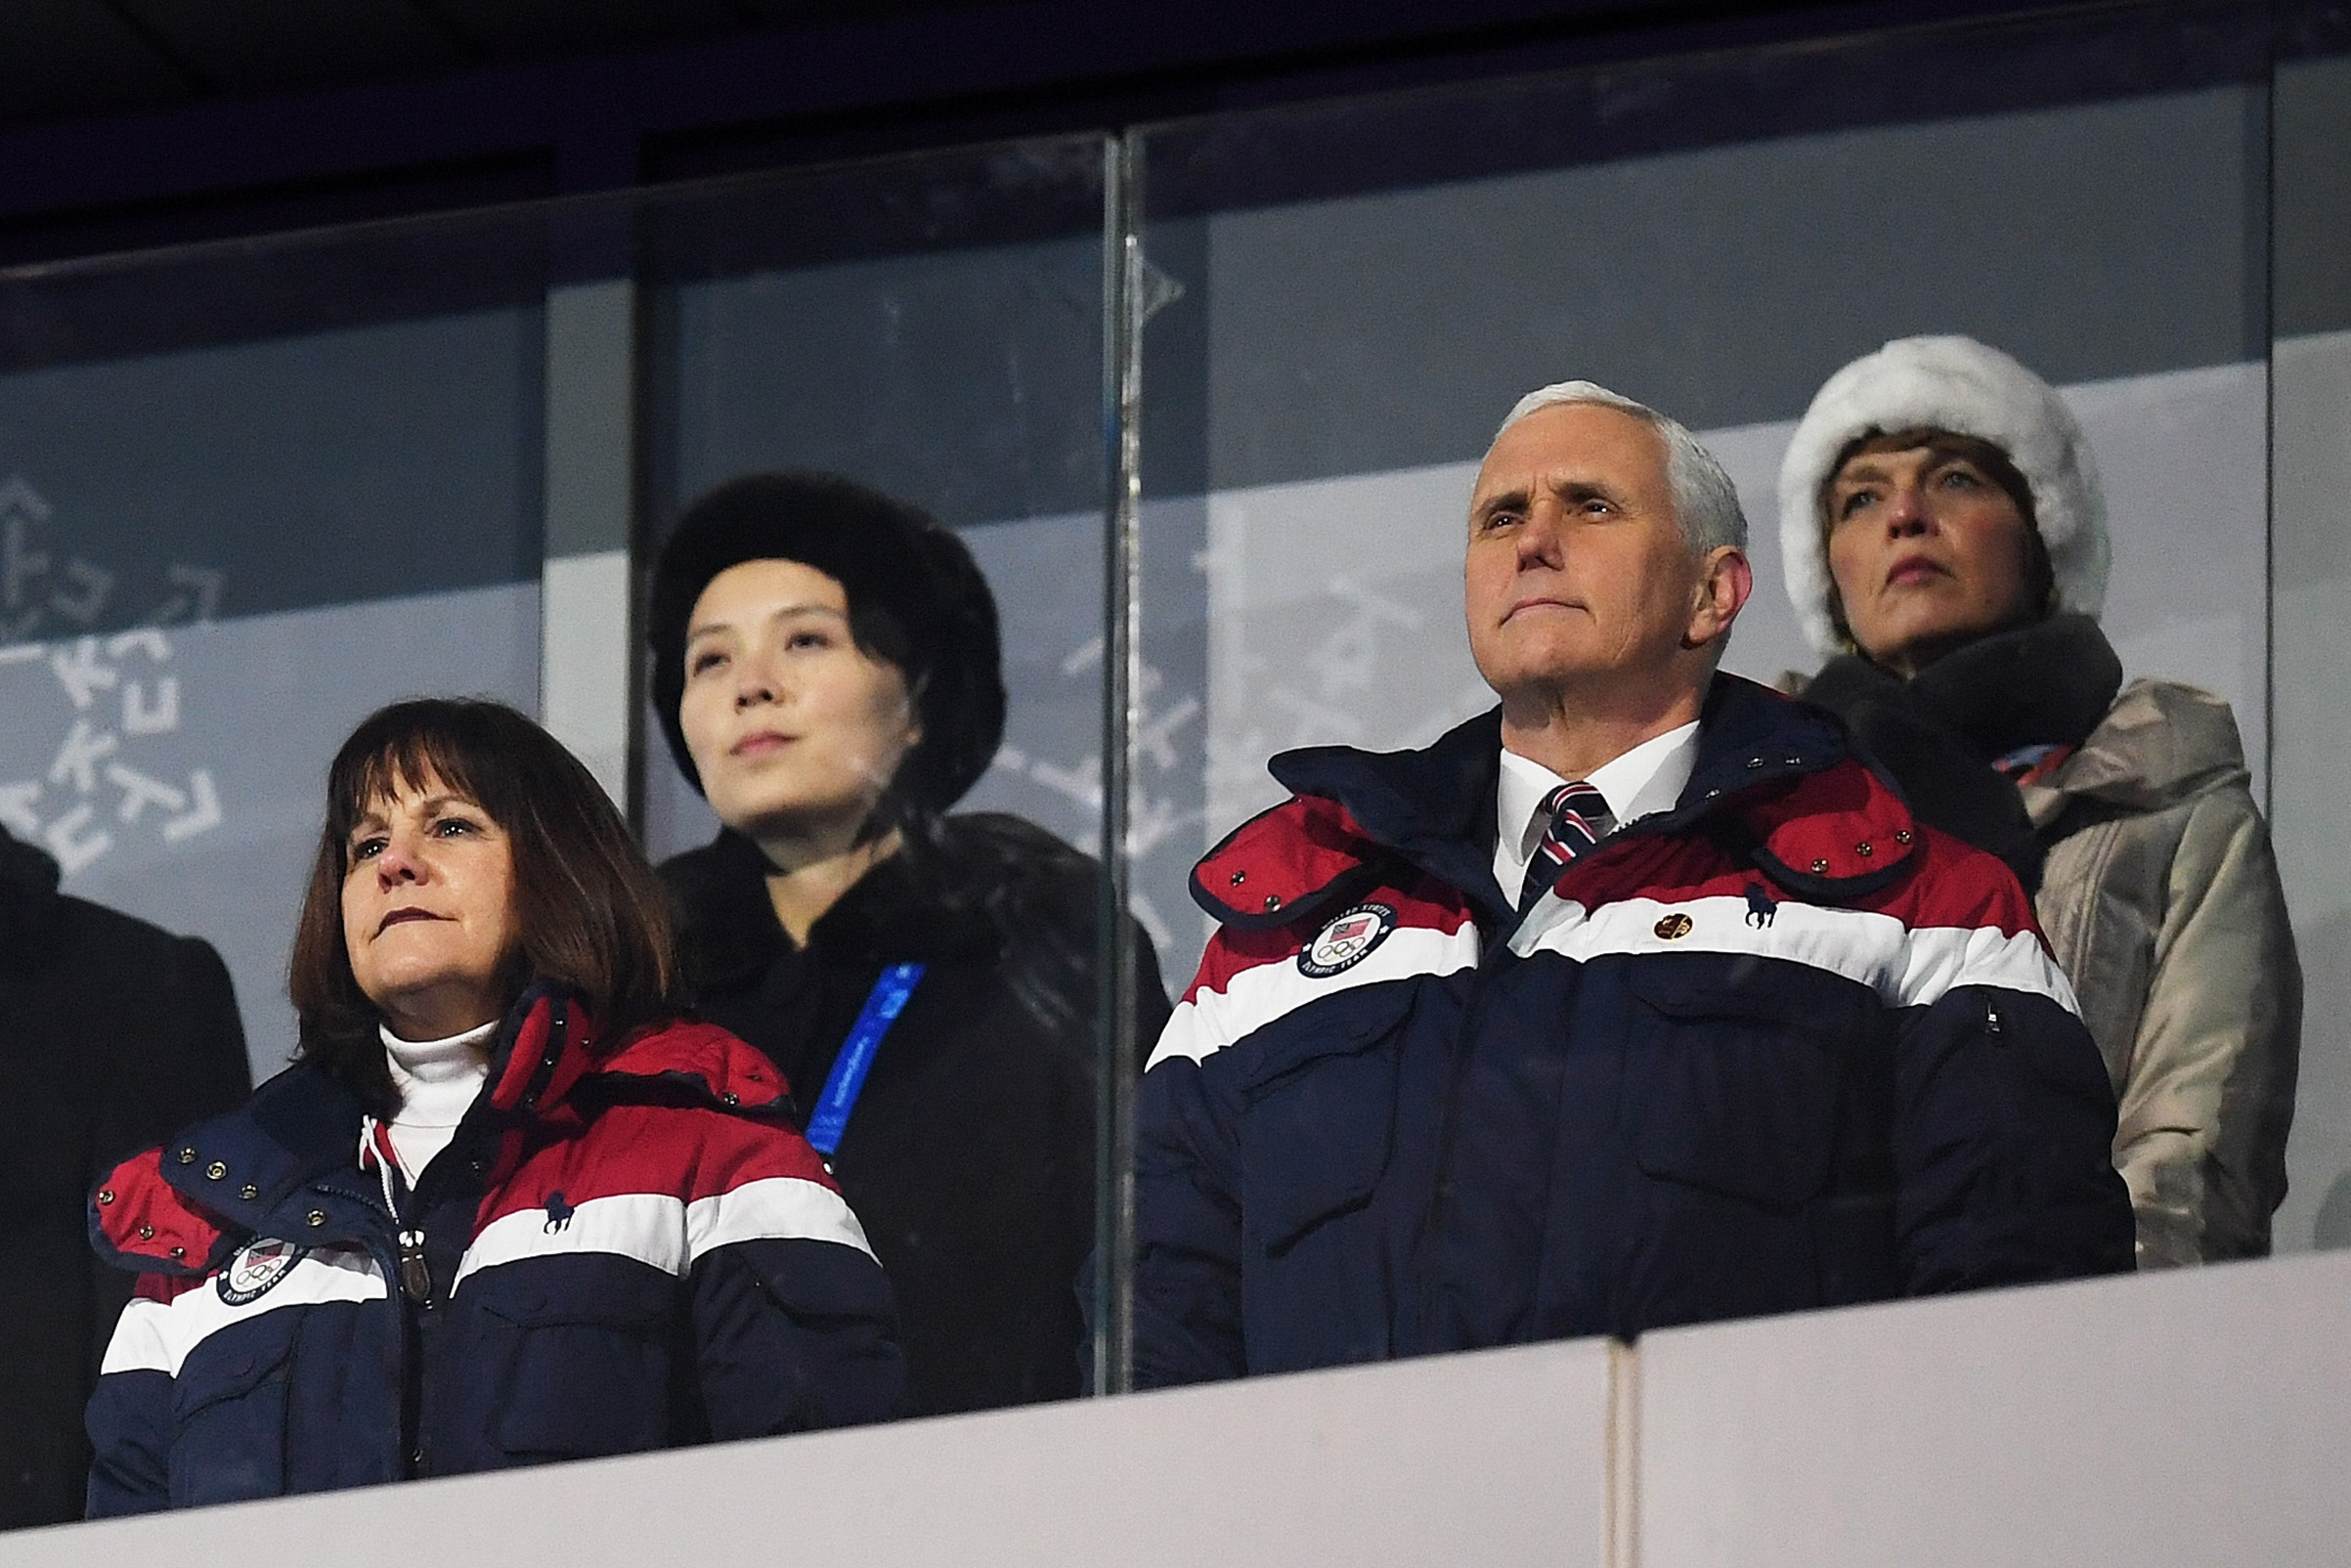 Vice President Mike Pence and his wife Karen watch on during the Opening Ceremony of the PyeongChang 2018 Winter Olympic Games. Behind pence sits Kim Yo-jong (back left), the sister of North Korean leader Kim Jong-Un, at PyeongChang Olympic Stadium in South Korea on Feb. 9, 2018. (Matthias Hangst—Getty Images)